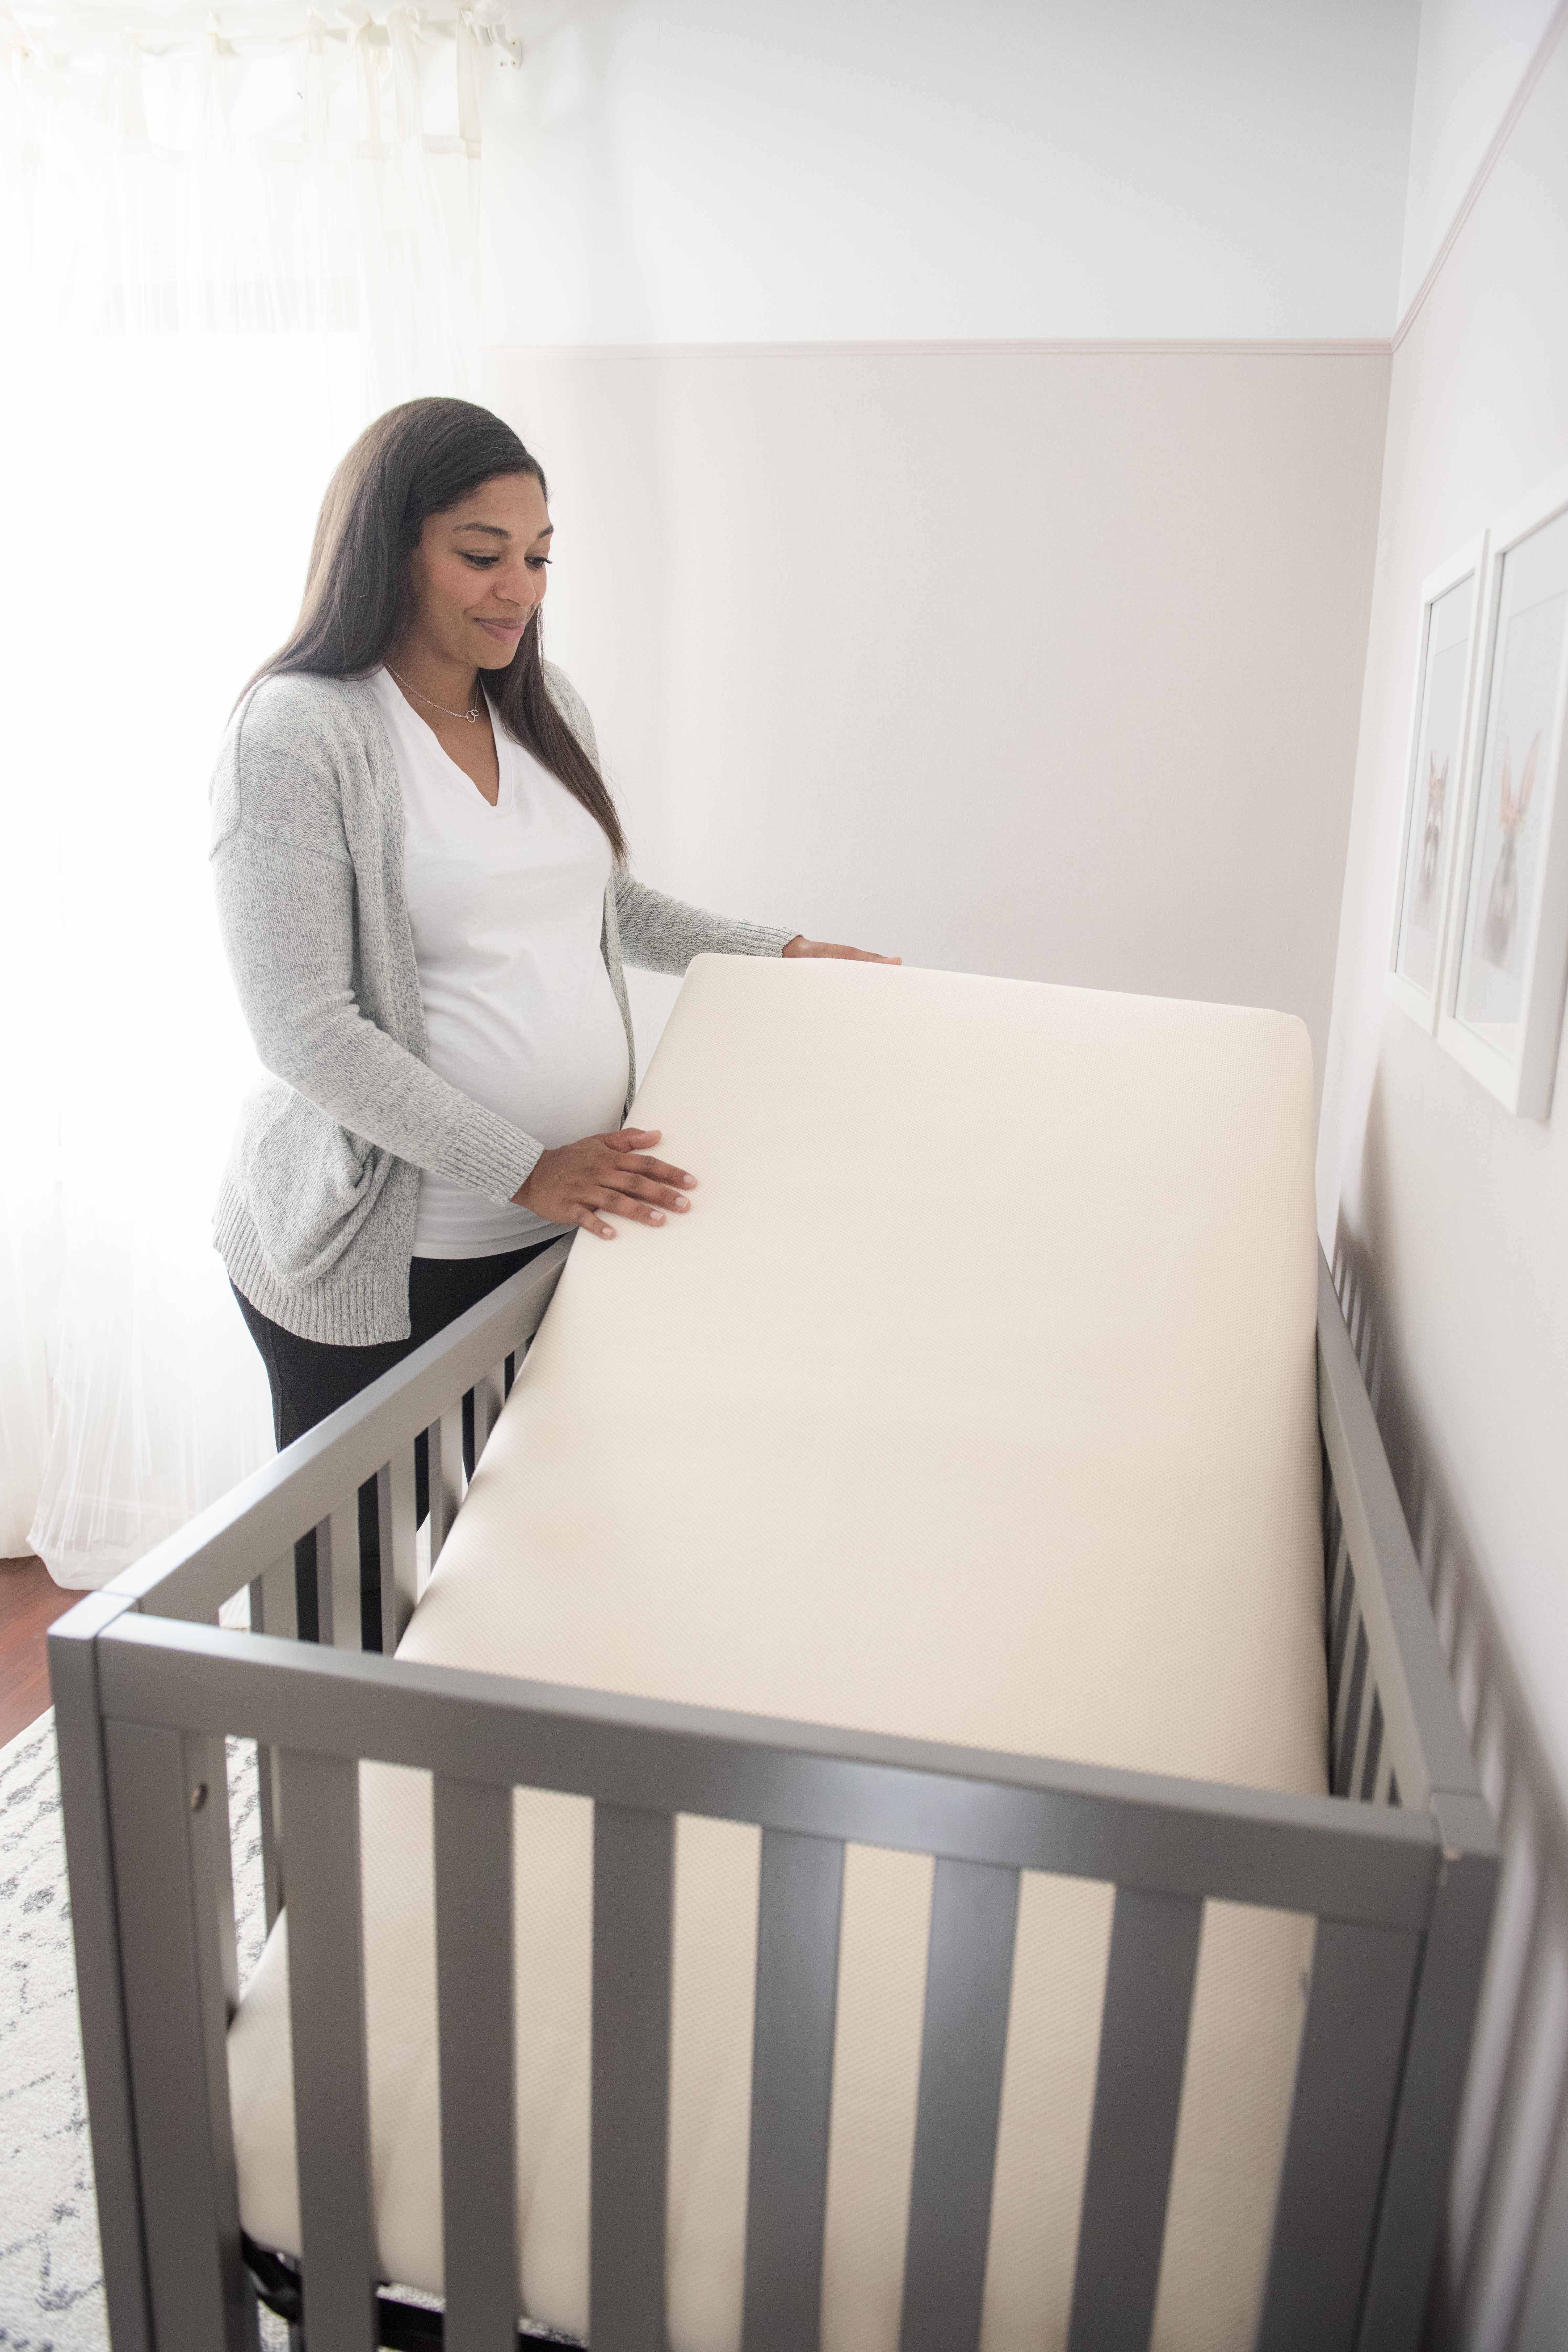 8 Best Breathable Crib Mattresses 2023, According to Parents & Experts